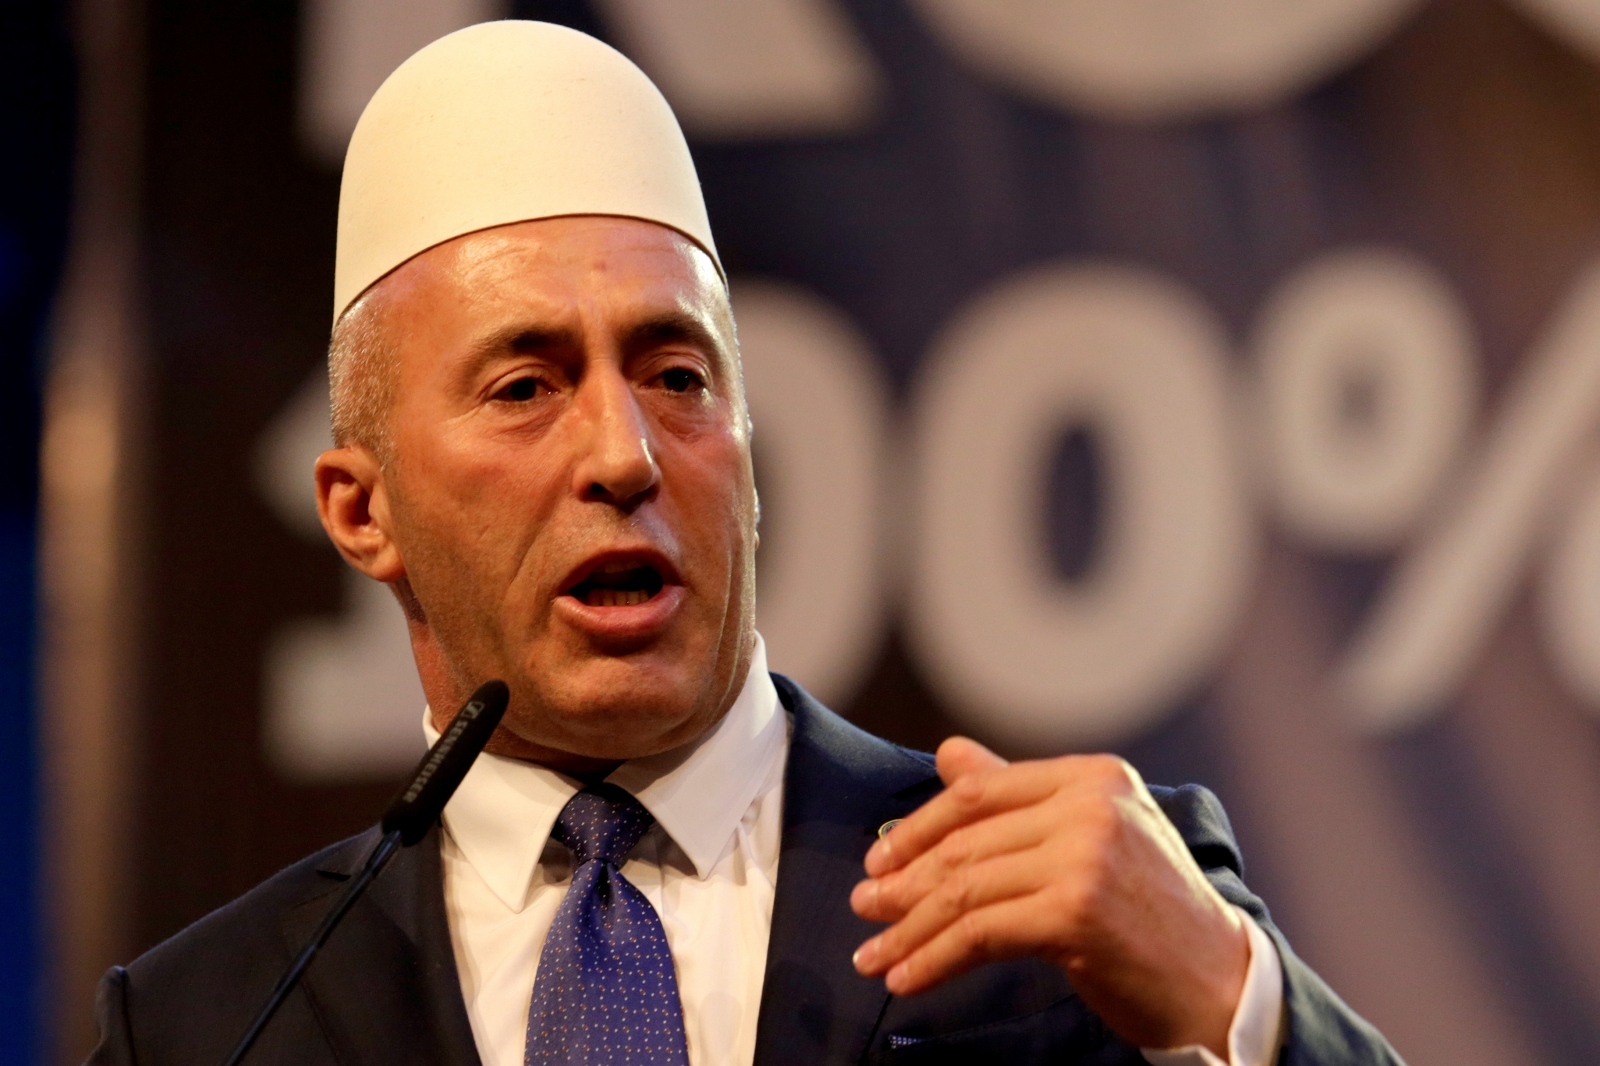 FILE PHOTO: Haradinaj, leader of AAK delivers his speech during a pre-election rally in Pristina FILE PHOTO: Ramush Haradinaj, leader of the Alliance for the Future of Kosovo (AAK) delivers his speech during a pre-election rally in Pristina, Kosovo, October 3, 2019. REUTERS/Florion Goga/File Photo Florion Goga